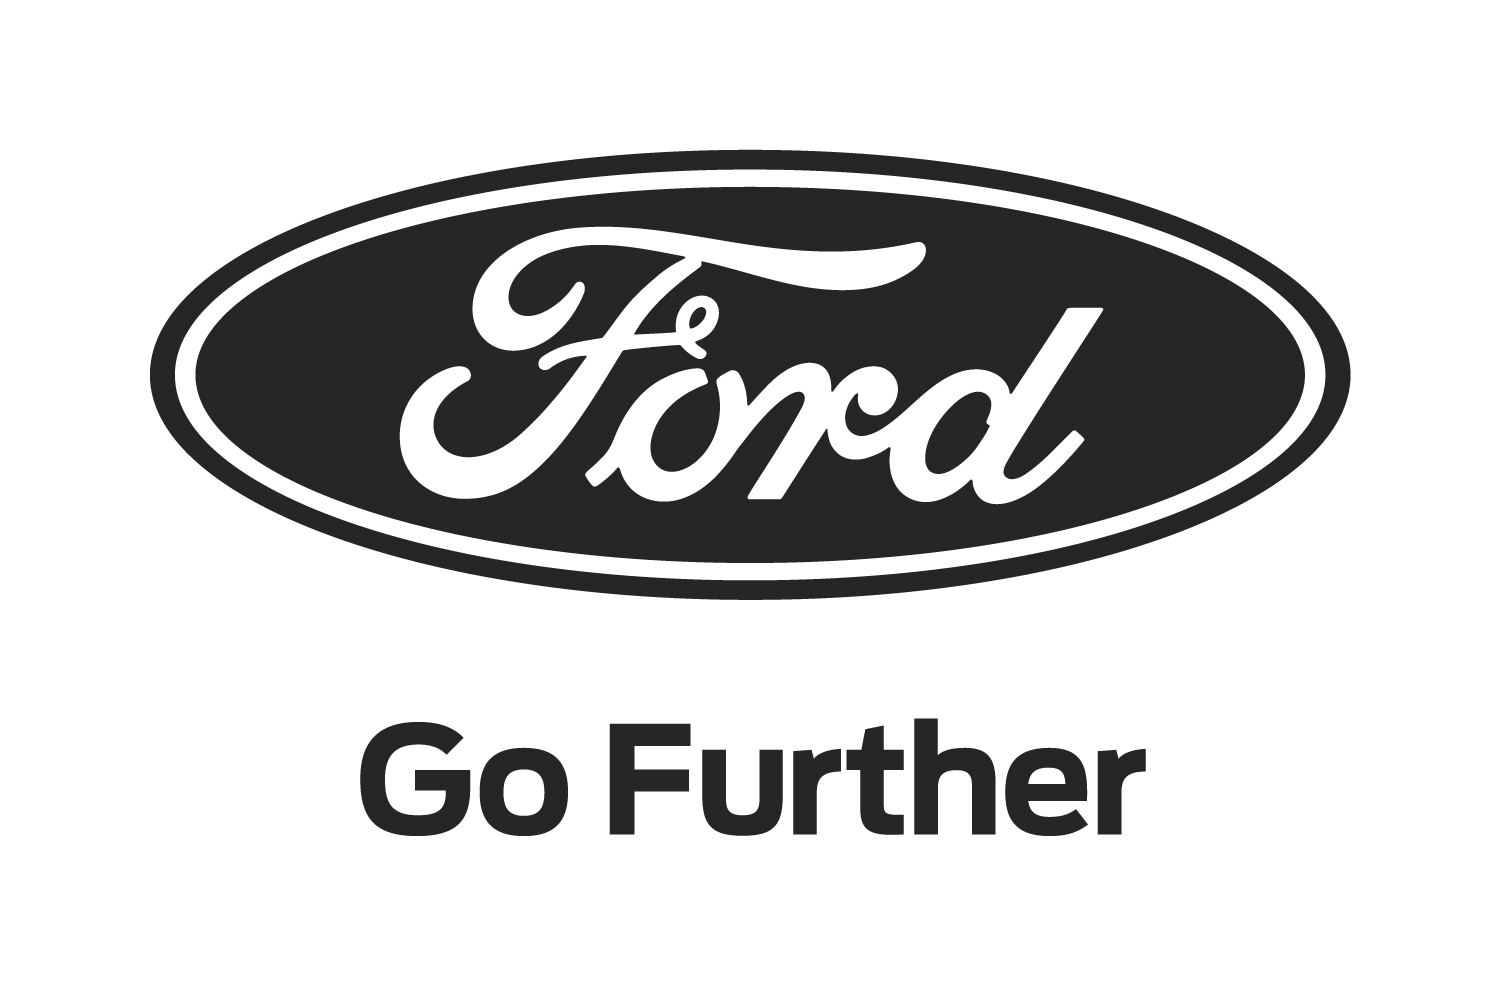 Black and White Ford Logo - John Andrew Ford - John Andrew | New, Used and Demonstrators Ford ...